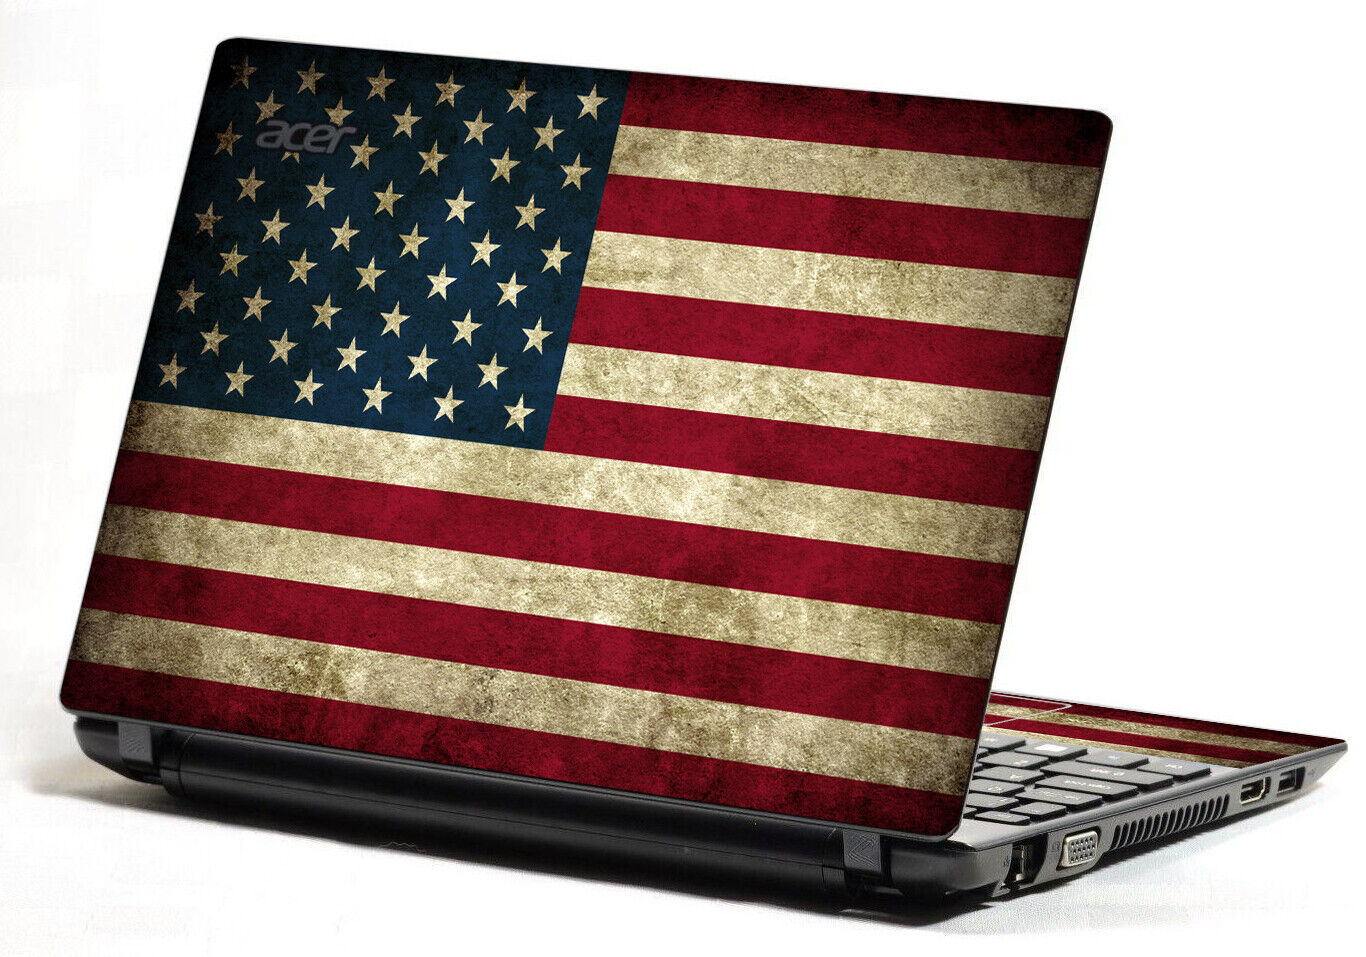 LidStyles Printed Laptop Skin Protector Decal Acer Aspire One AO756-2840